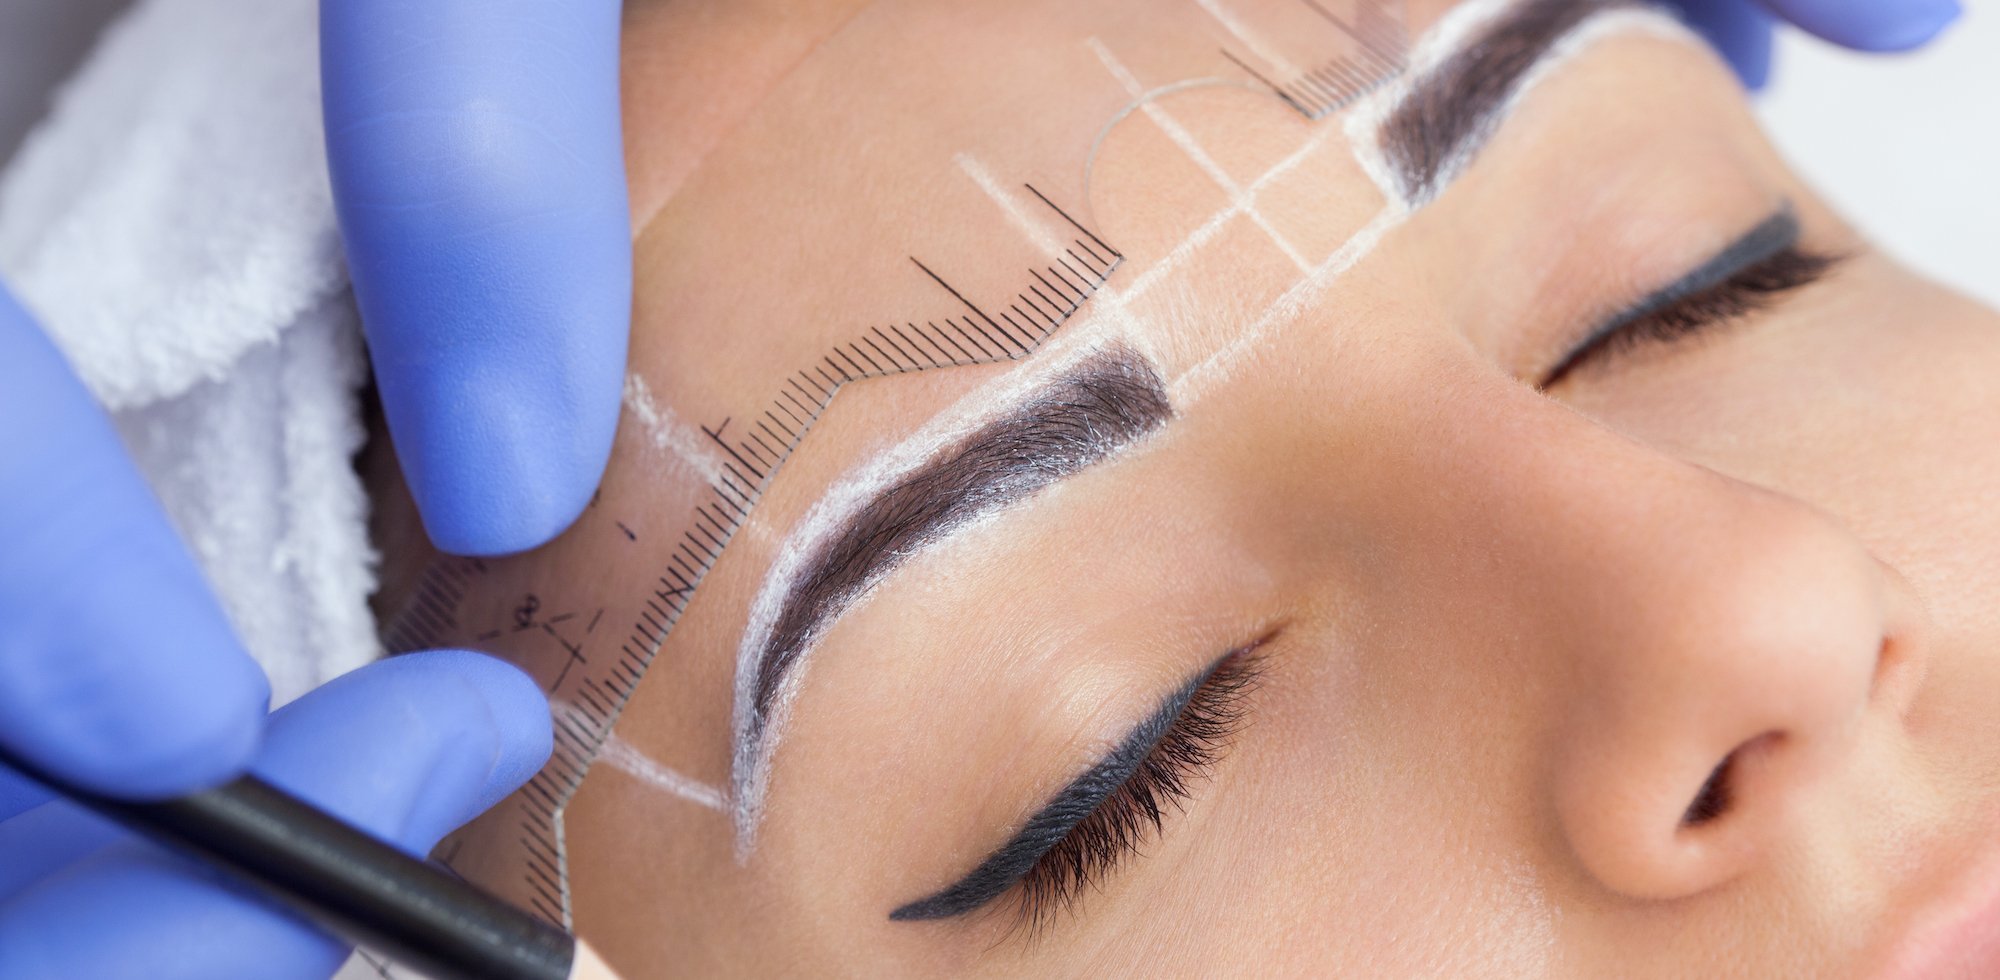 The Typical Microblading Eyebrows Cost – Is It Worth It?